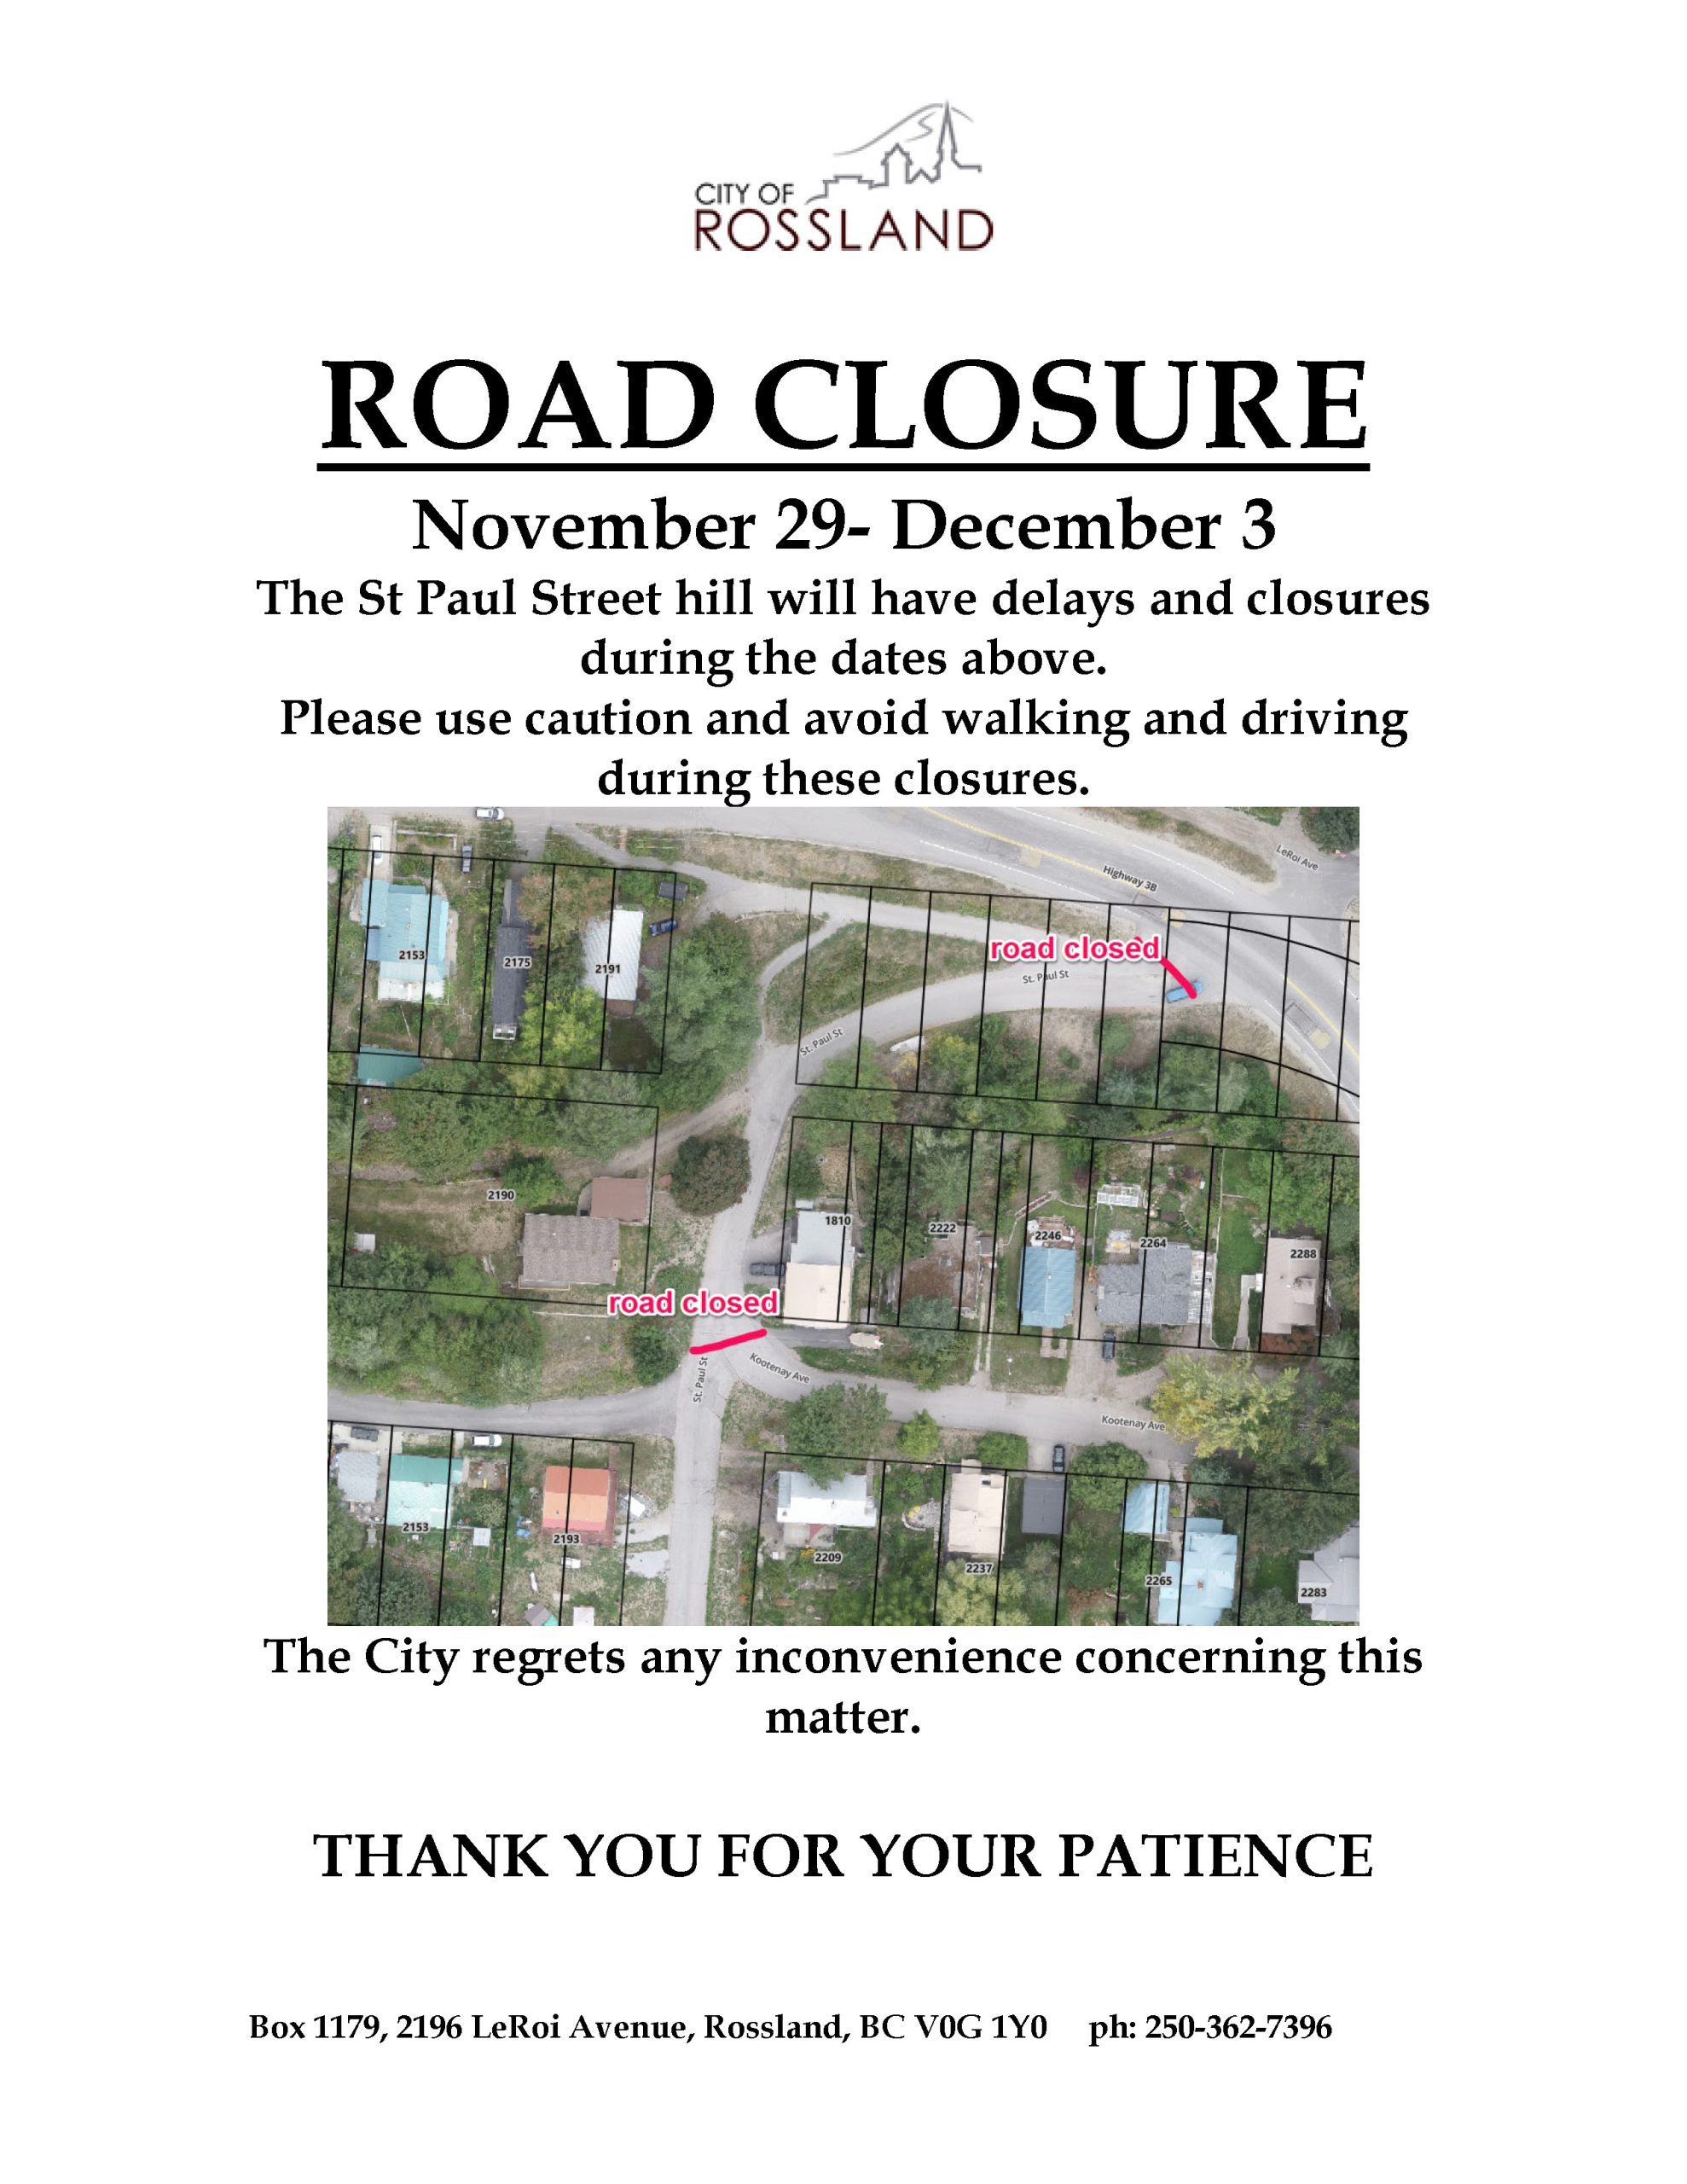 St Paul Street to be closed Nov. 29 to Dec. 3